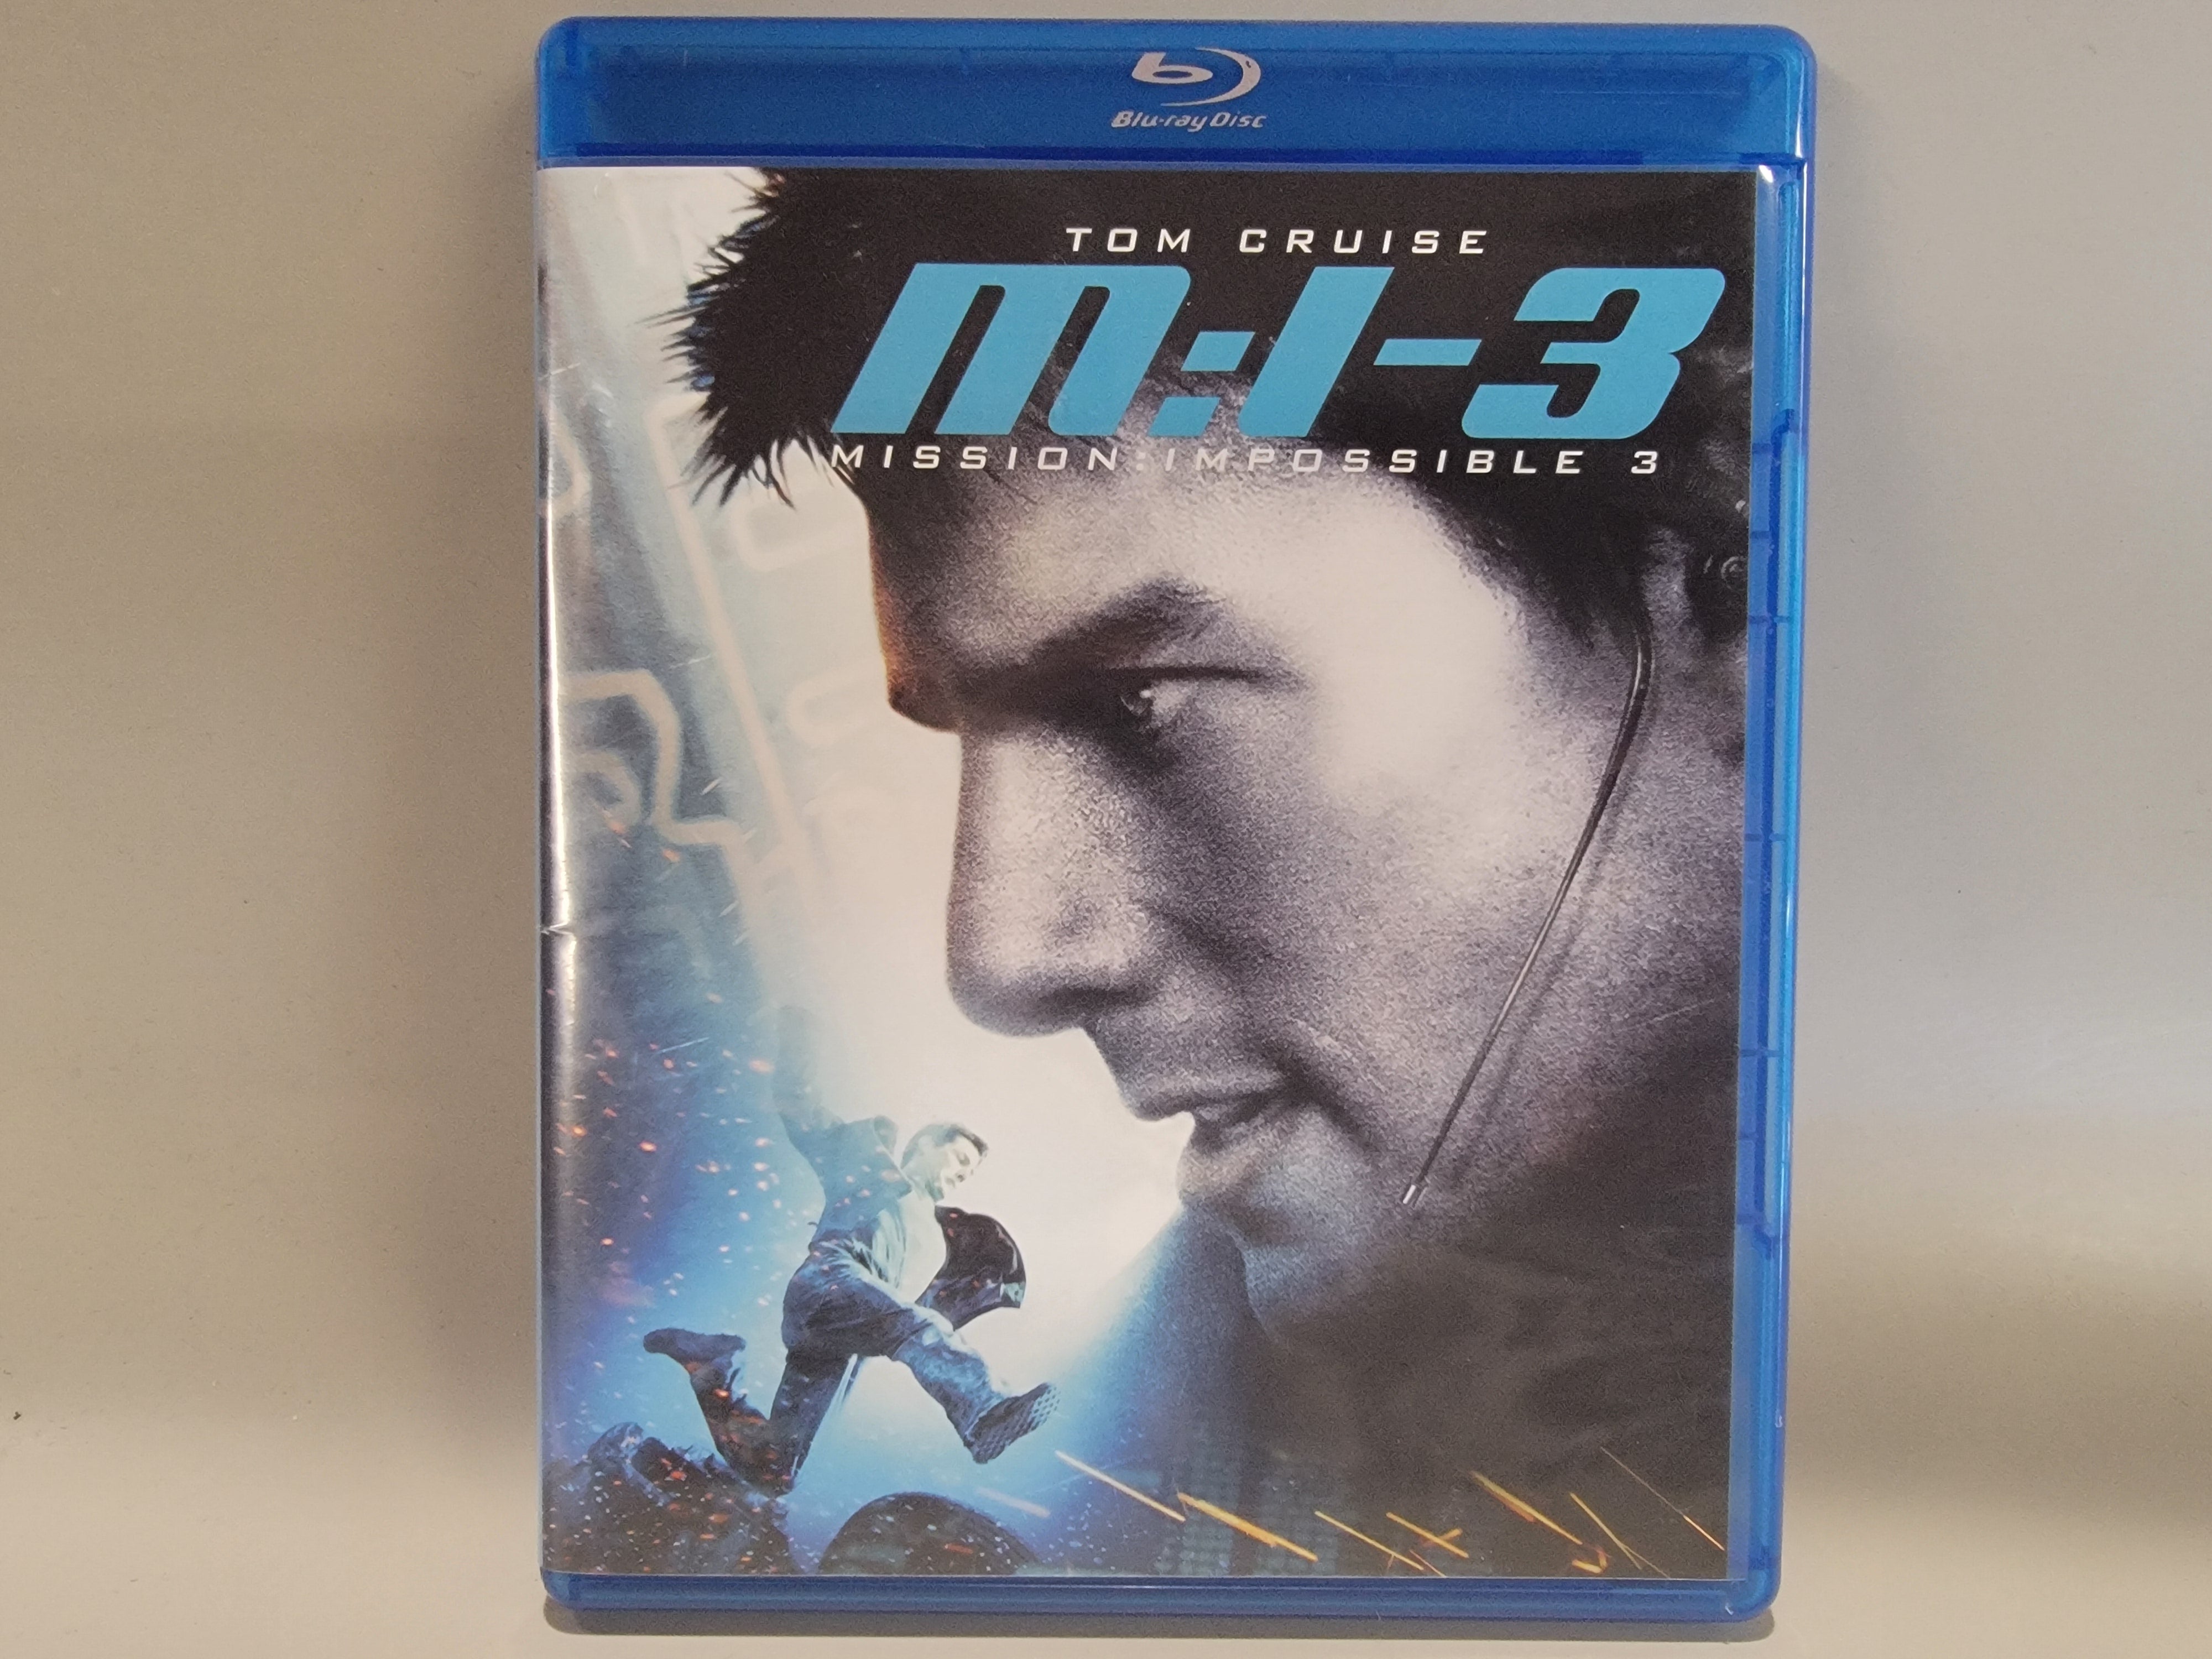 MISSION IMPOSSIBLE 3 BLU-RAY [USED]